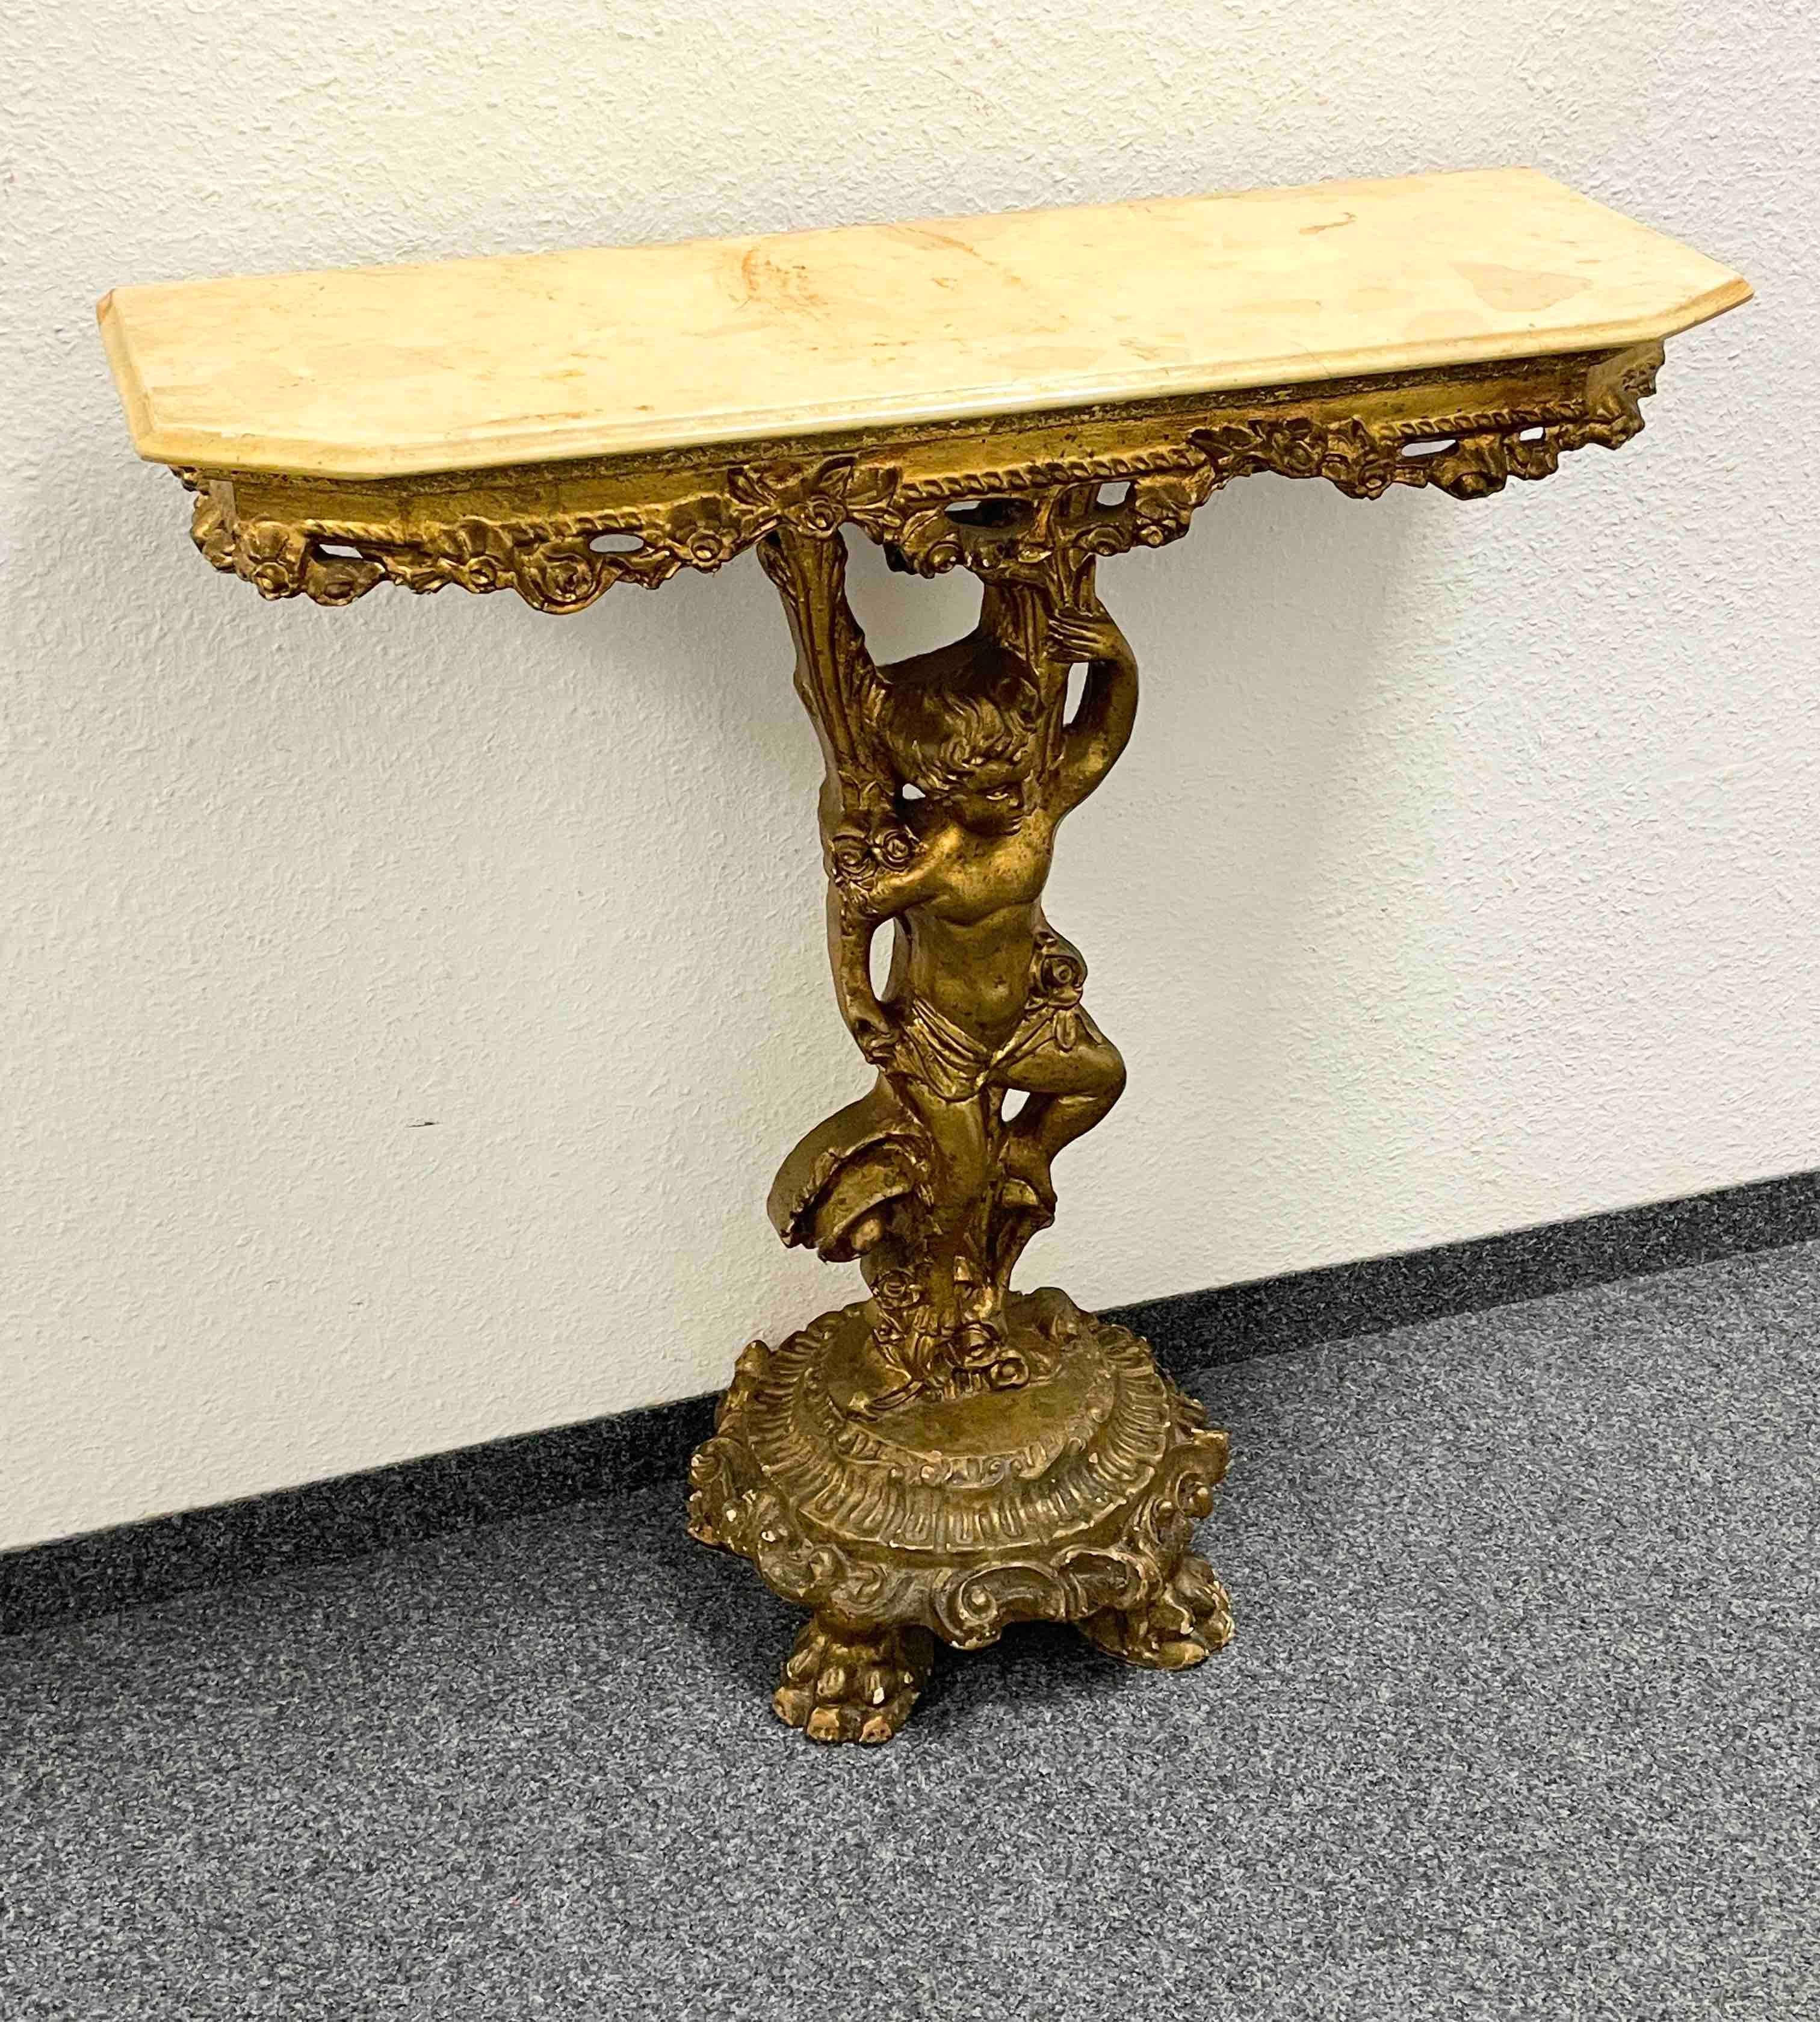 Beautiful Florentine Italian painted console table with marble top. Perfect as side table, next to a reading chair or used a small vanity table. It could also be great at the end of a narrow hallway with a mirror or artwork hung above it. The piece